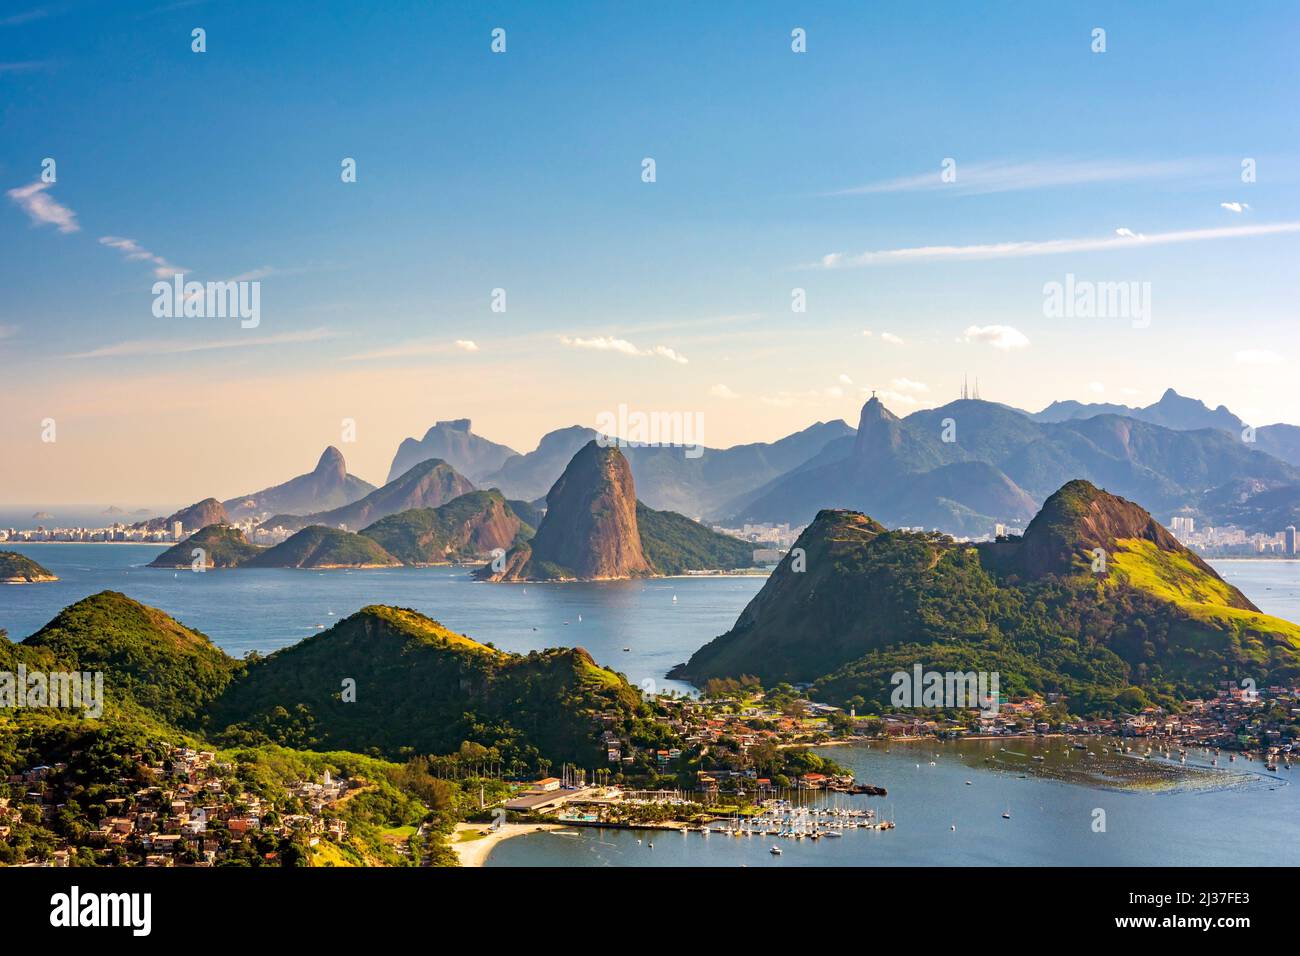 View from the top of the mountains, sea, Guanabara Bay and the city of Rio de Janeiro. Stock Photo